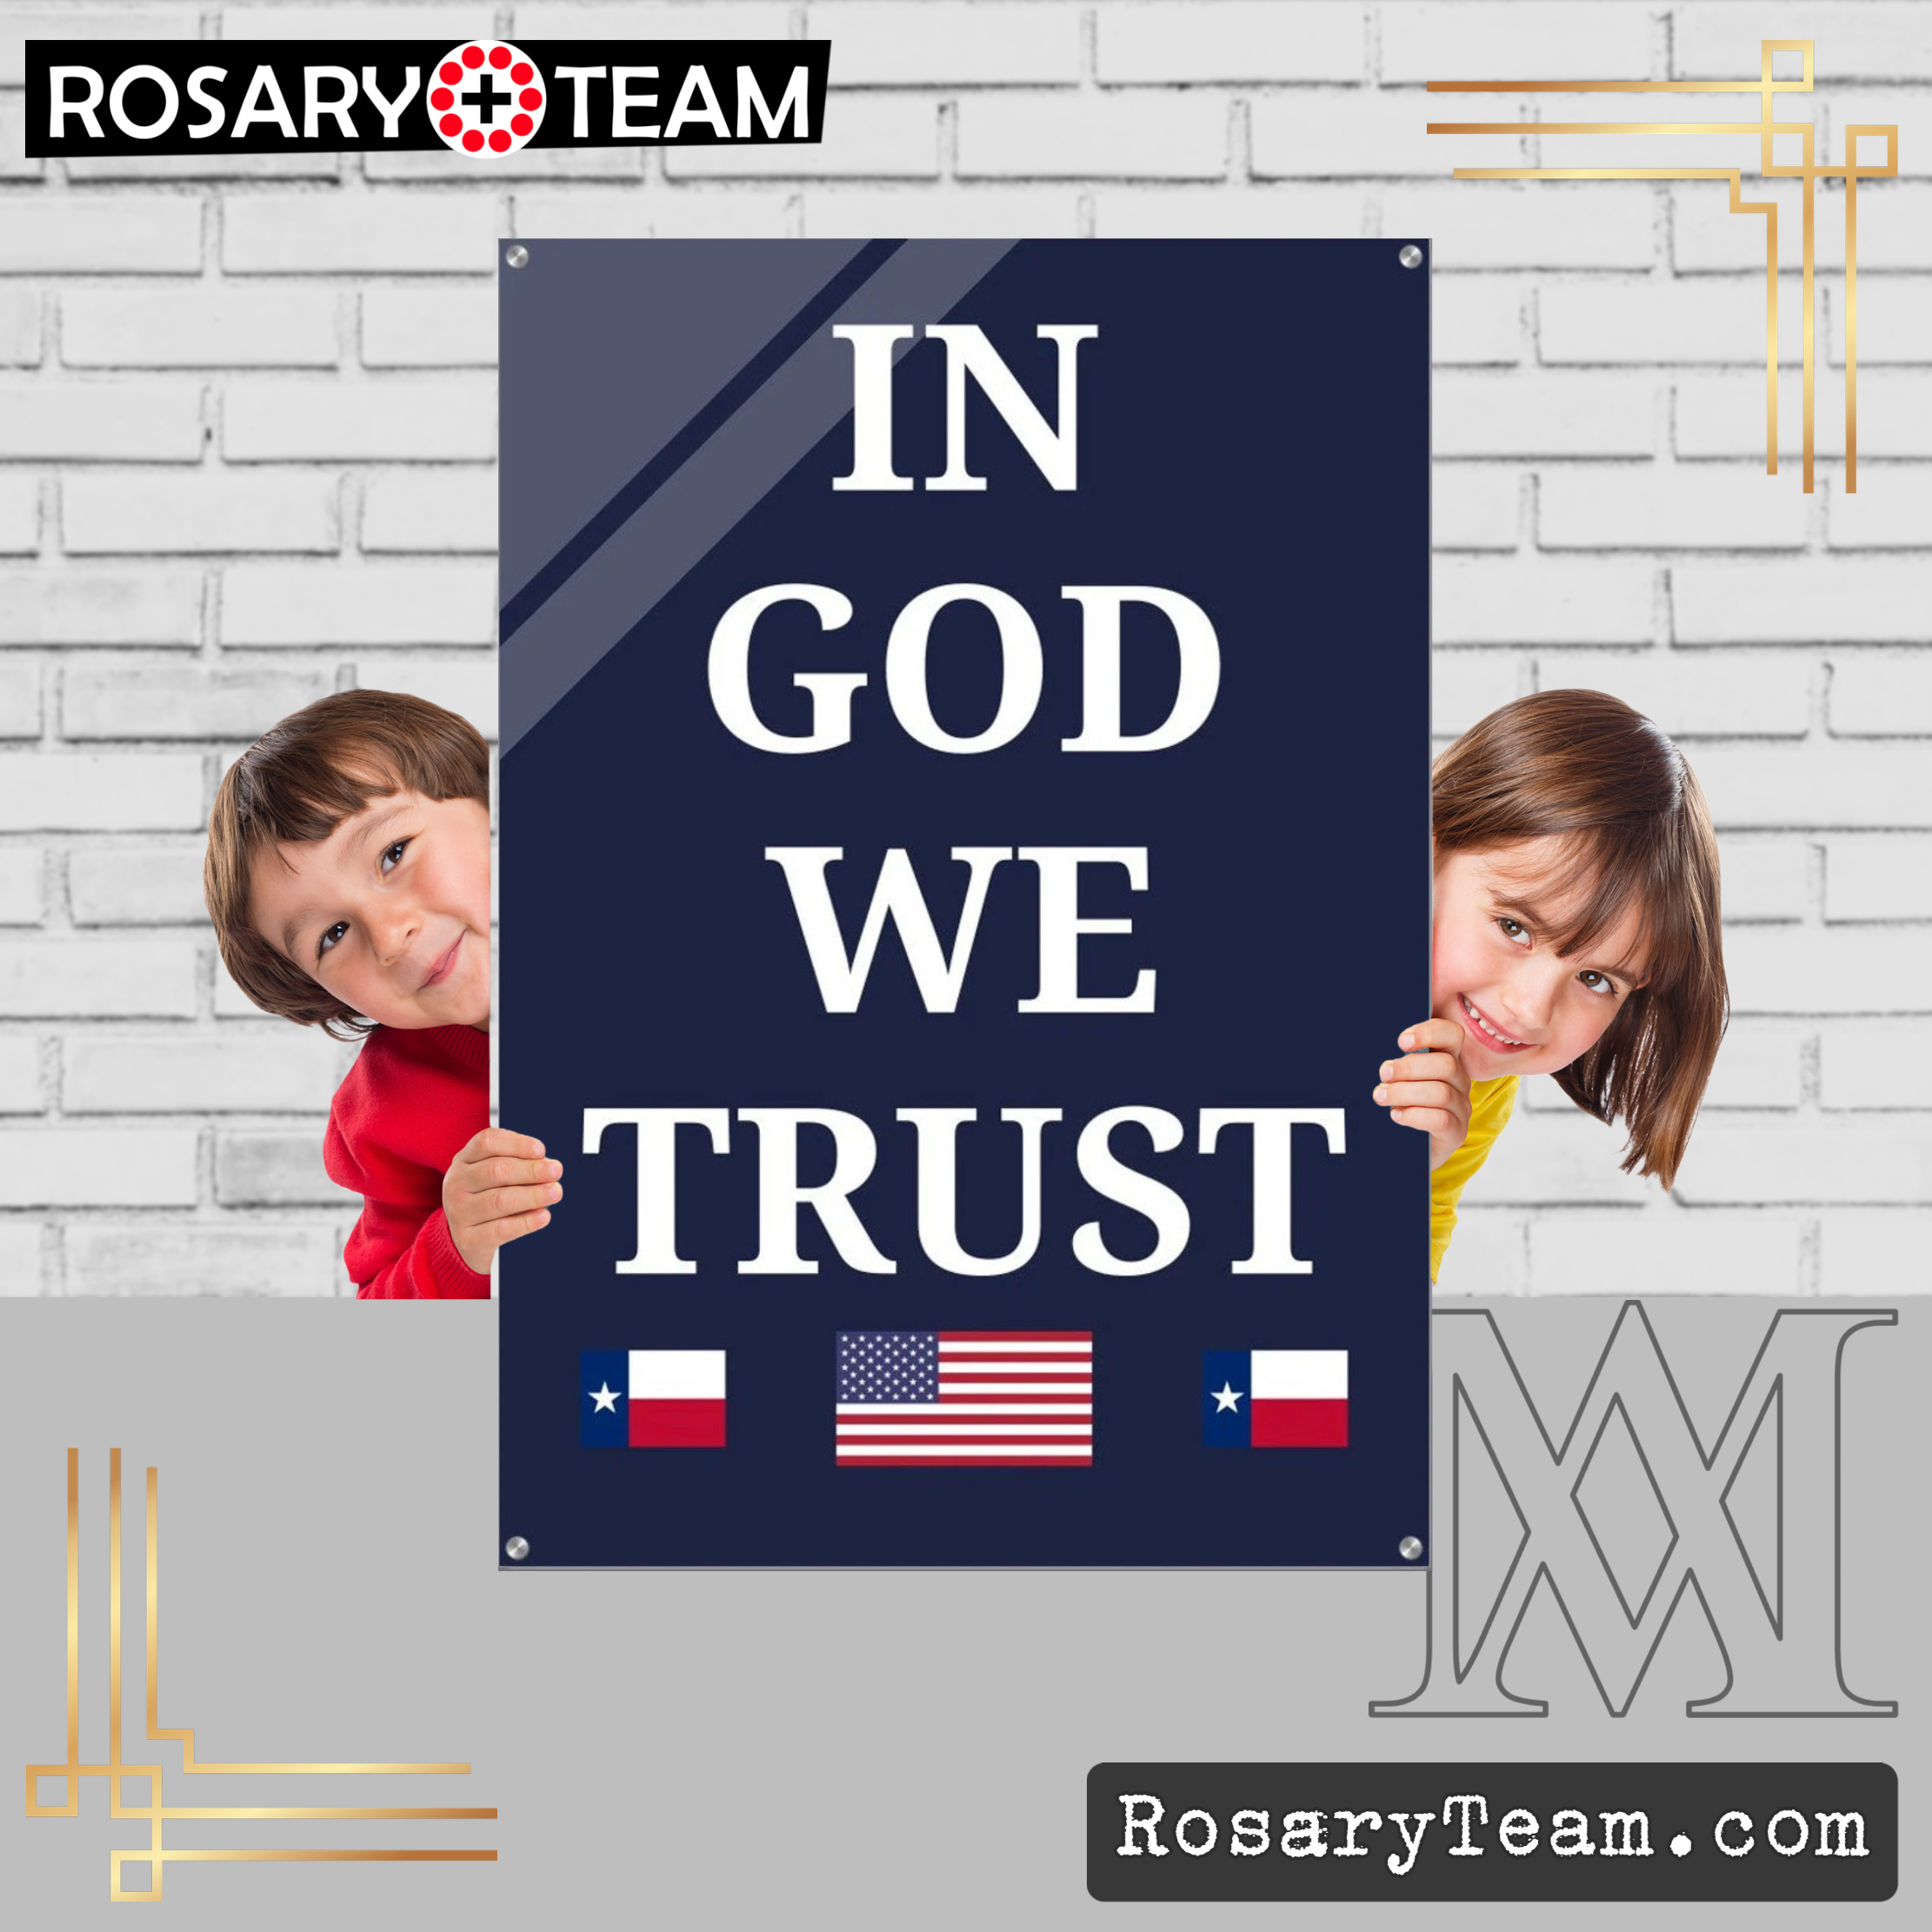 In God We Trust Premium Stunning Quality Acrylic Prints – With American and Texas Flag – Great to be donated to your School District